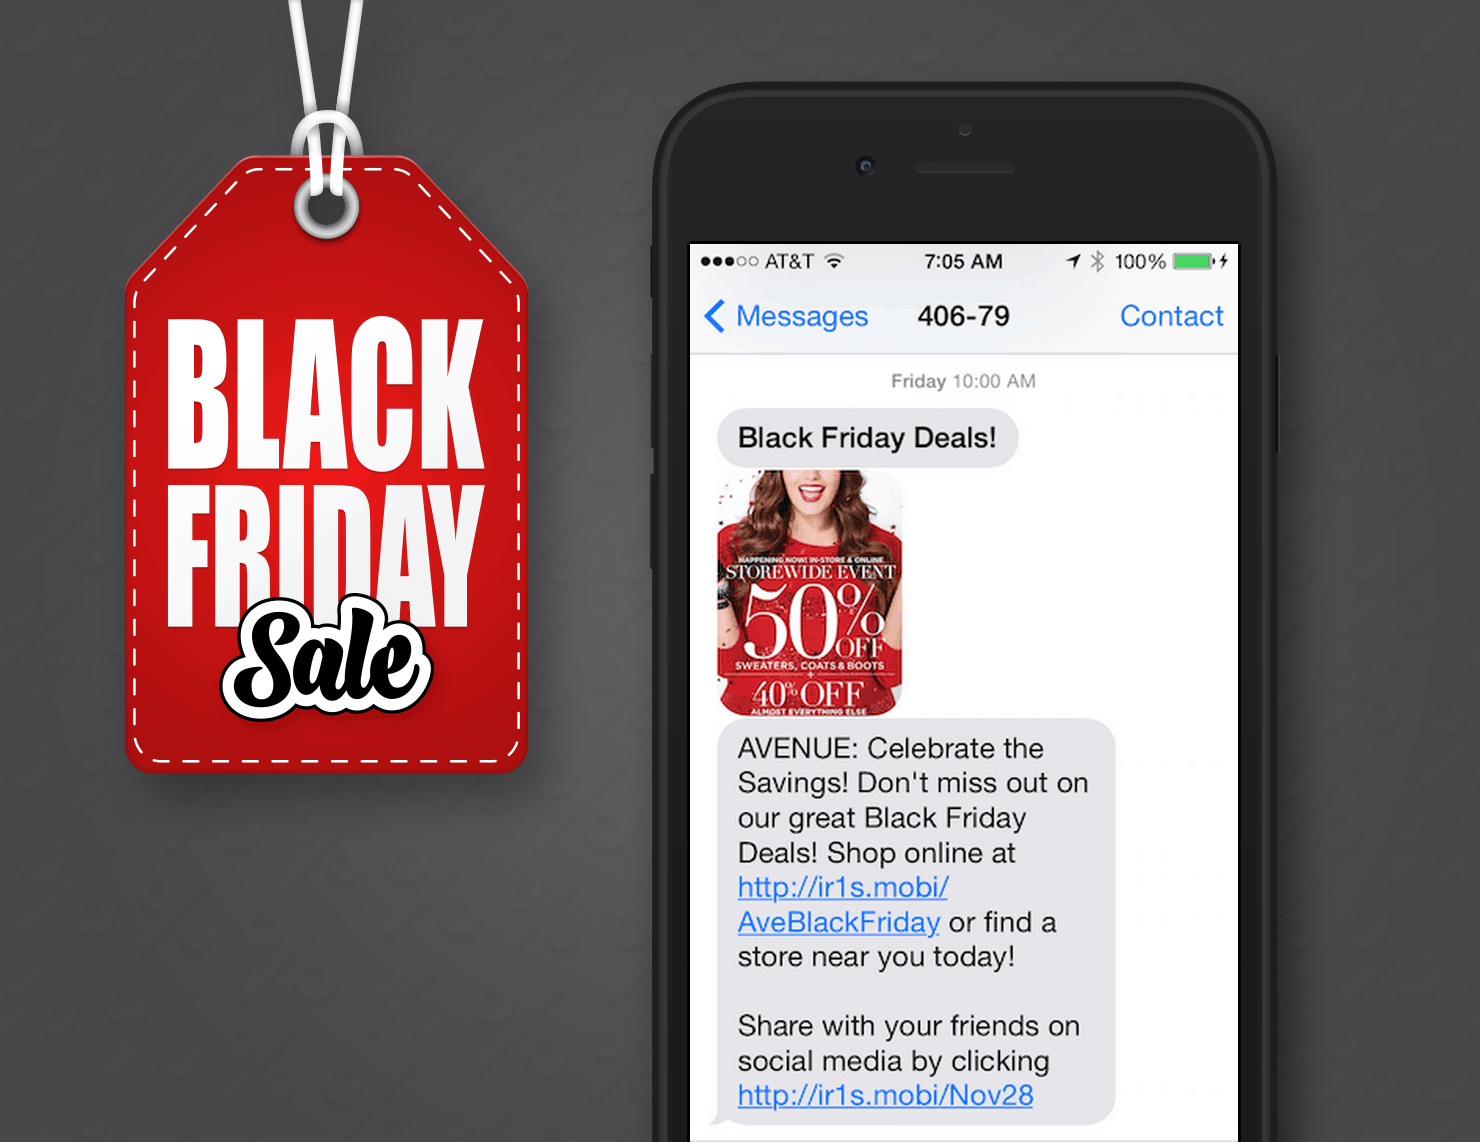 Black Friday SMS Marketing Example From Avenue Retail Stores